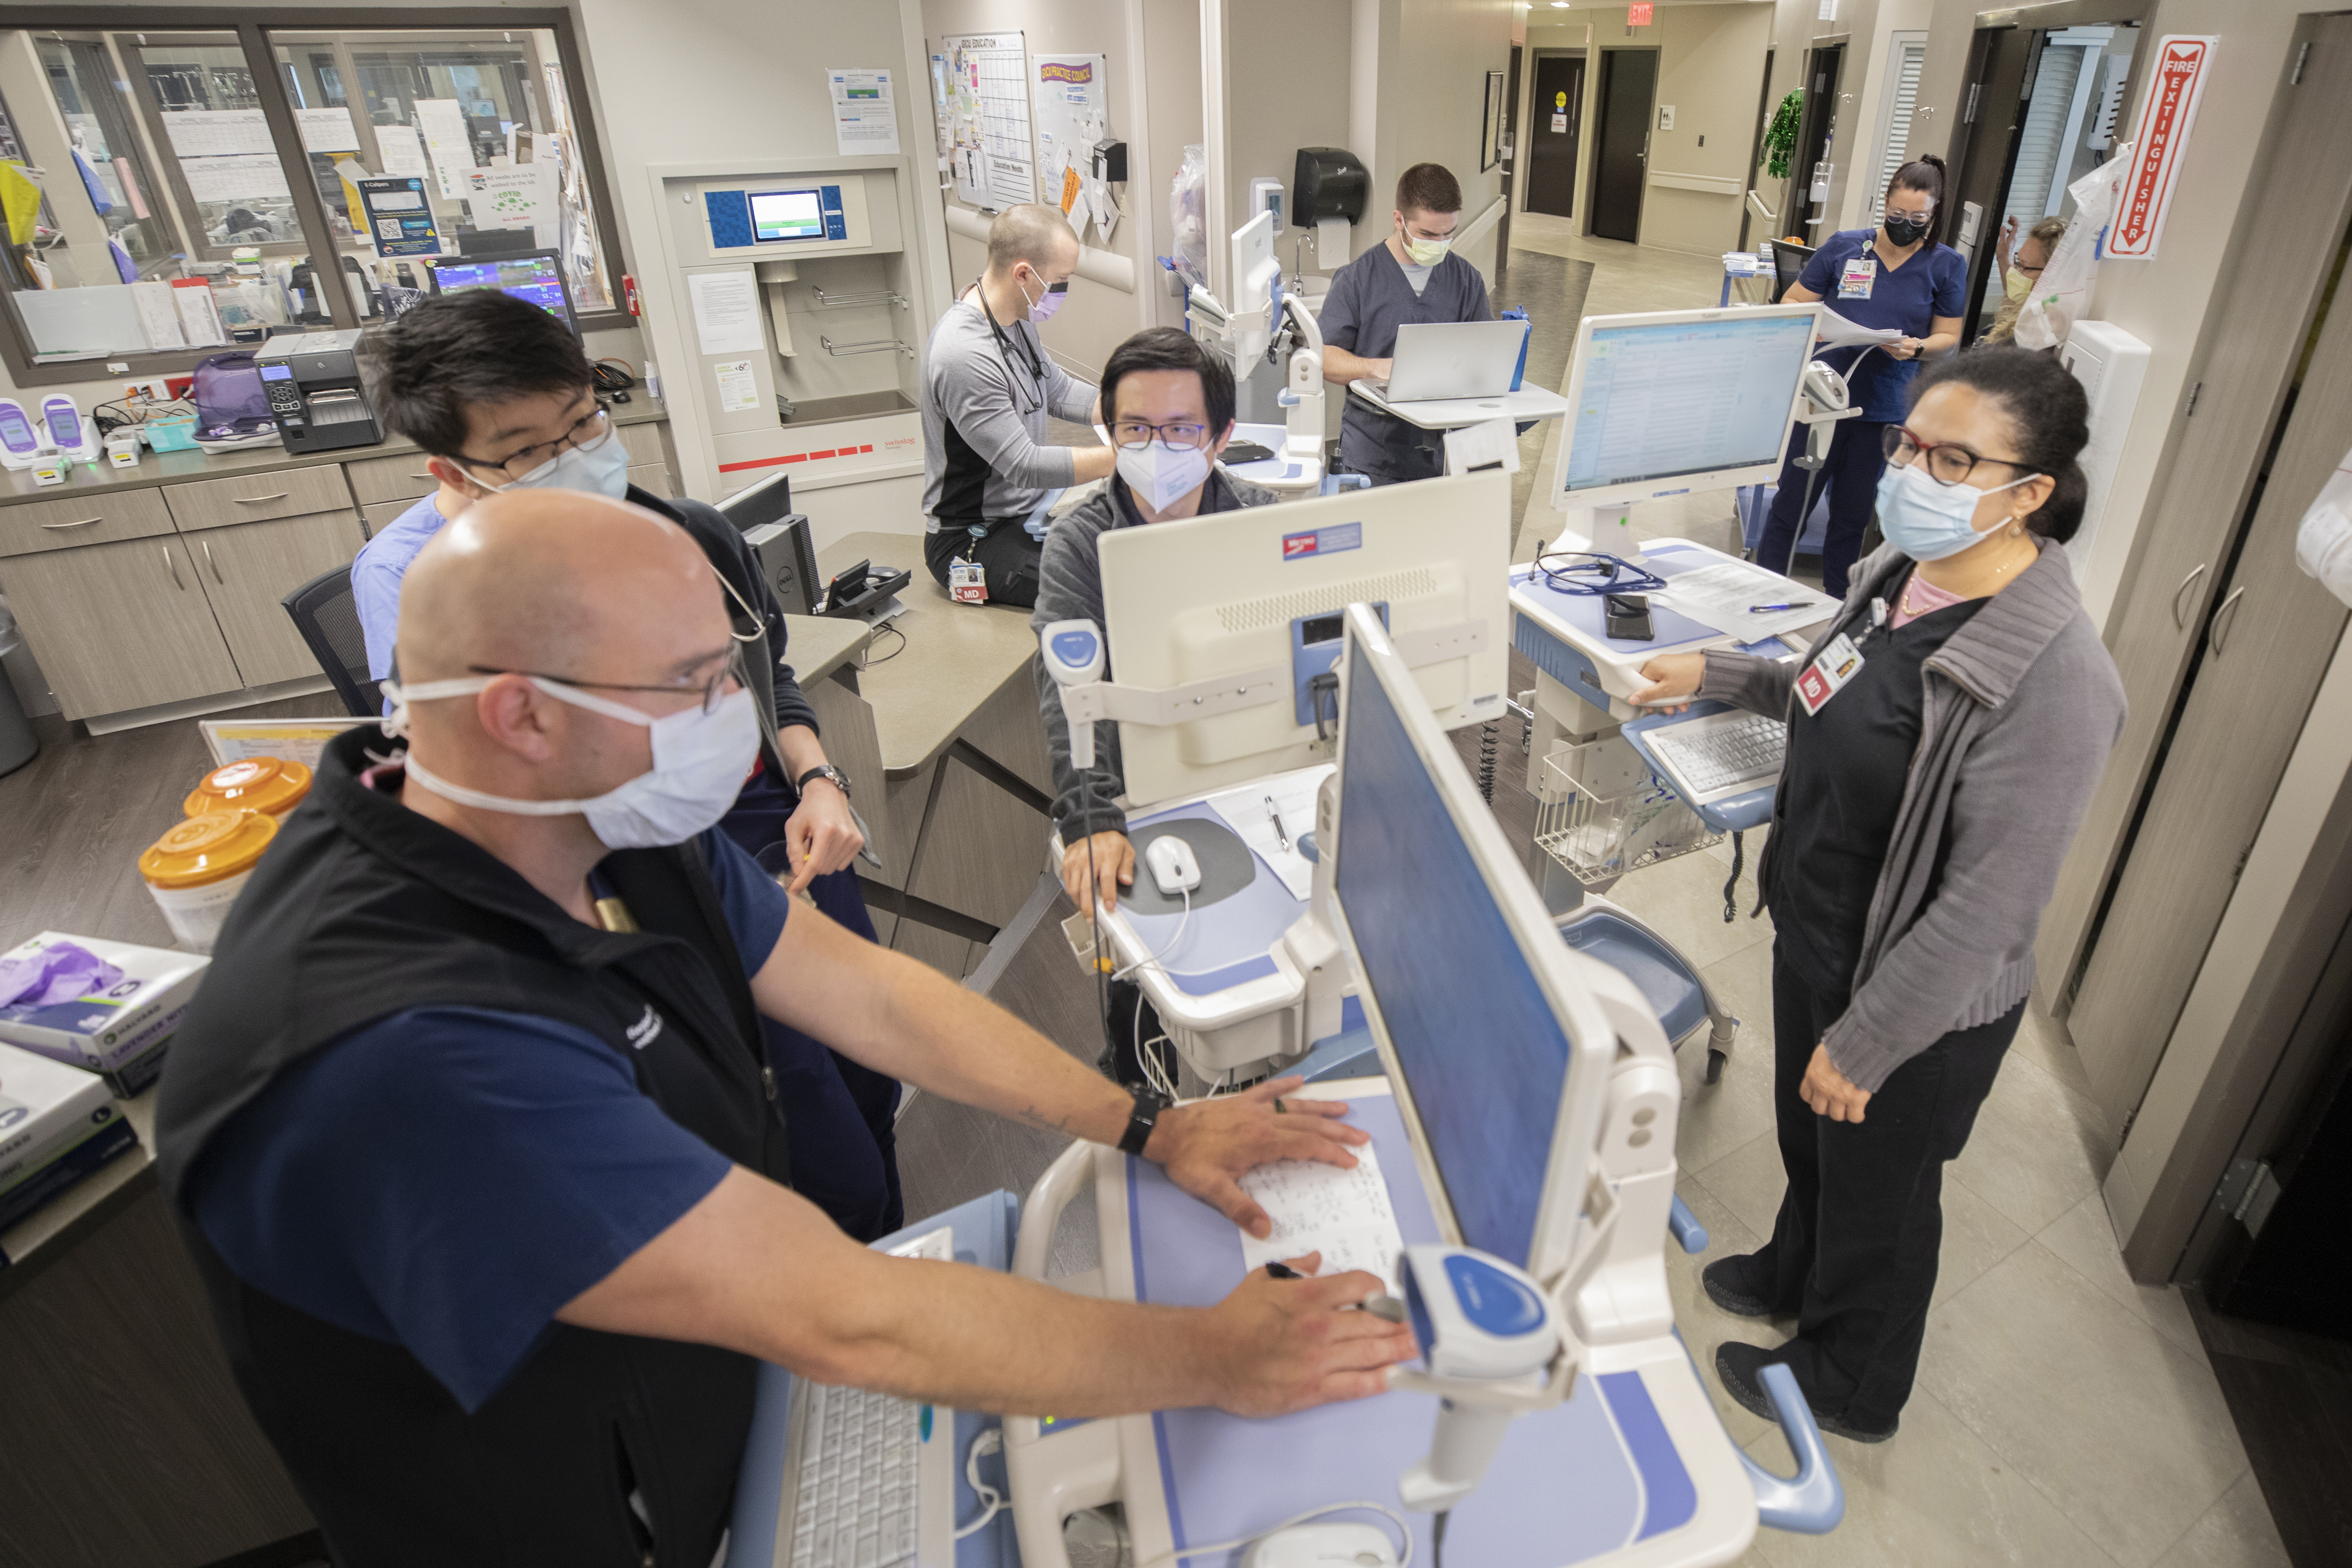 A photo of a group of doctors on Pulmonary/Critical Care rounds in the hospital.